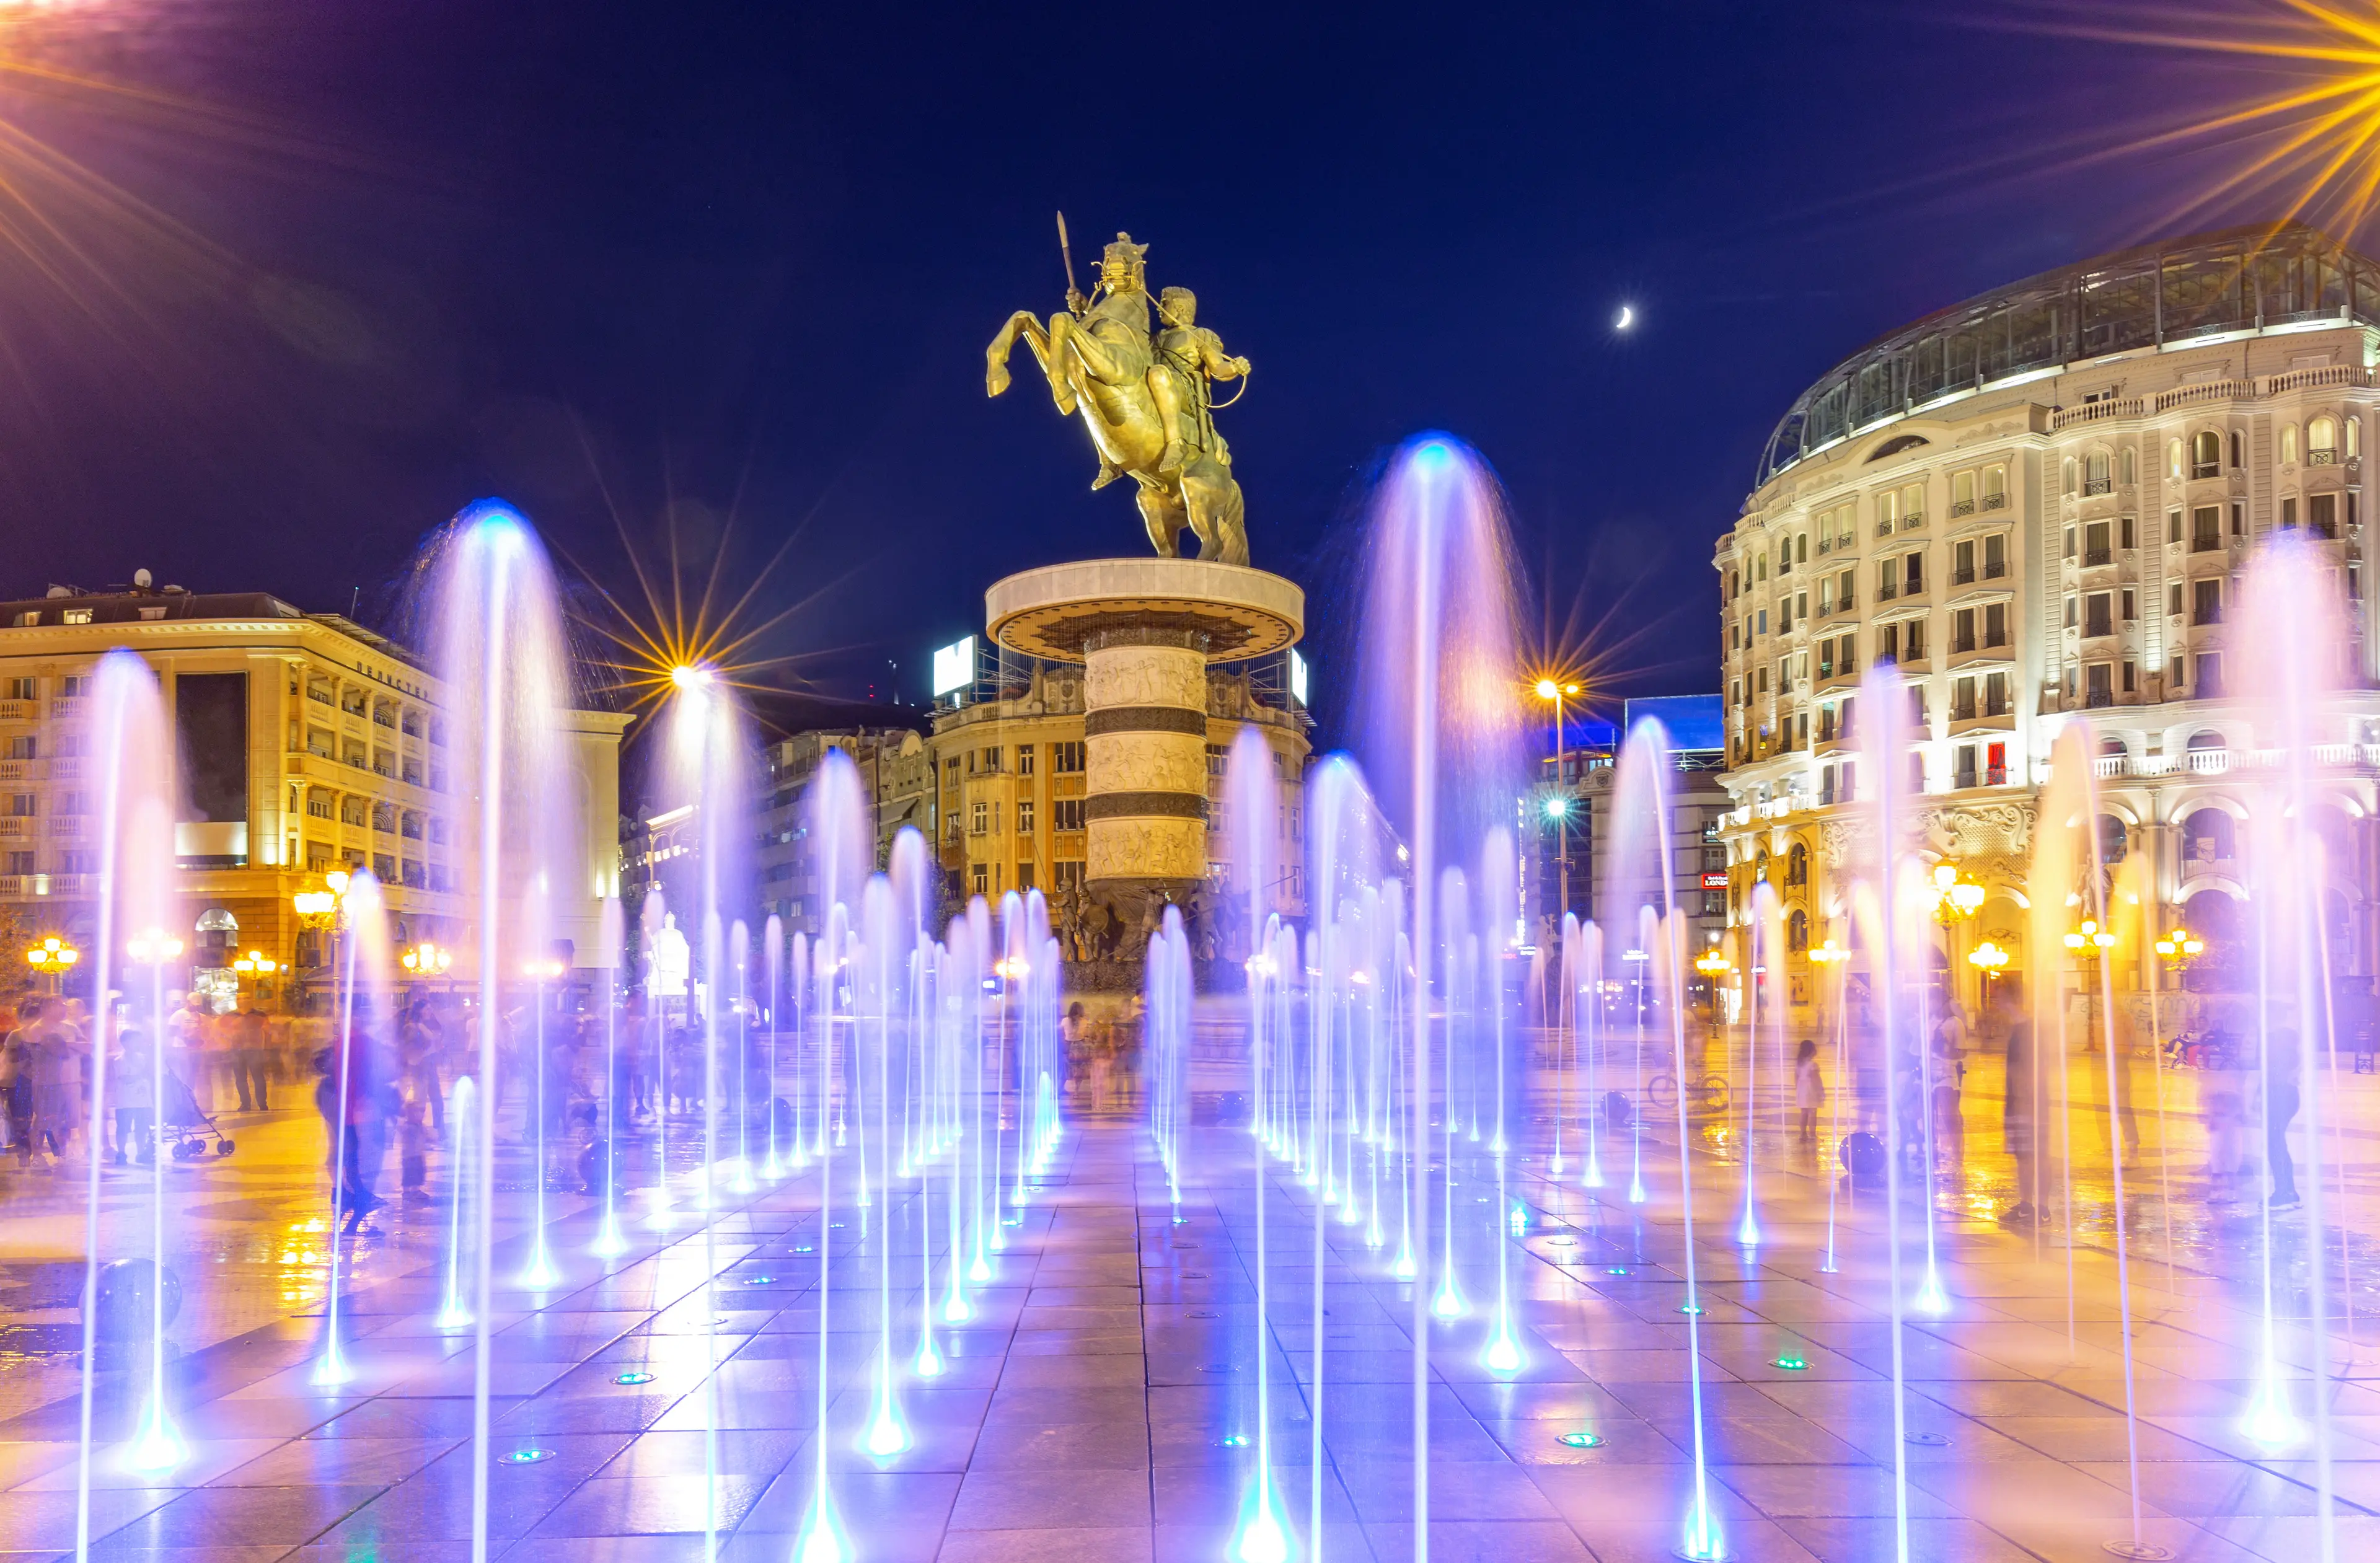 Square Macedonia and statue of Alexander the Great